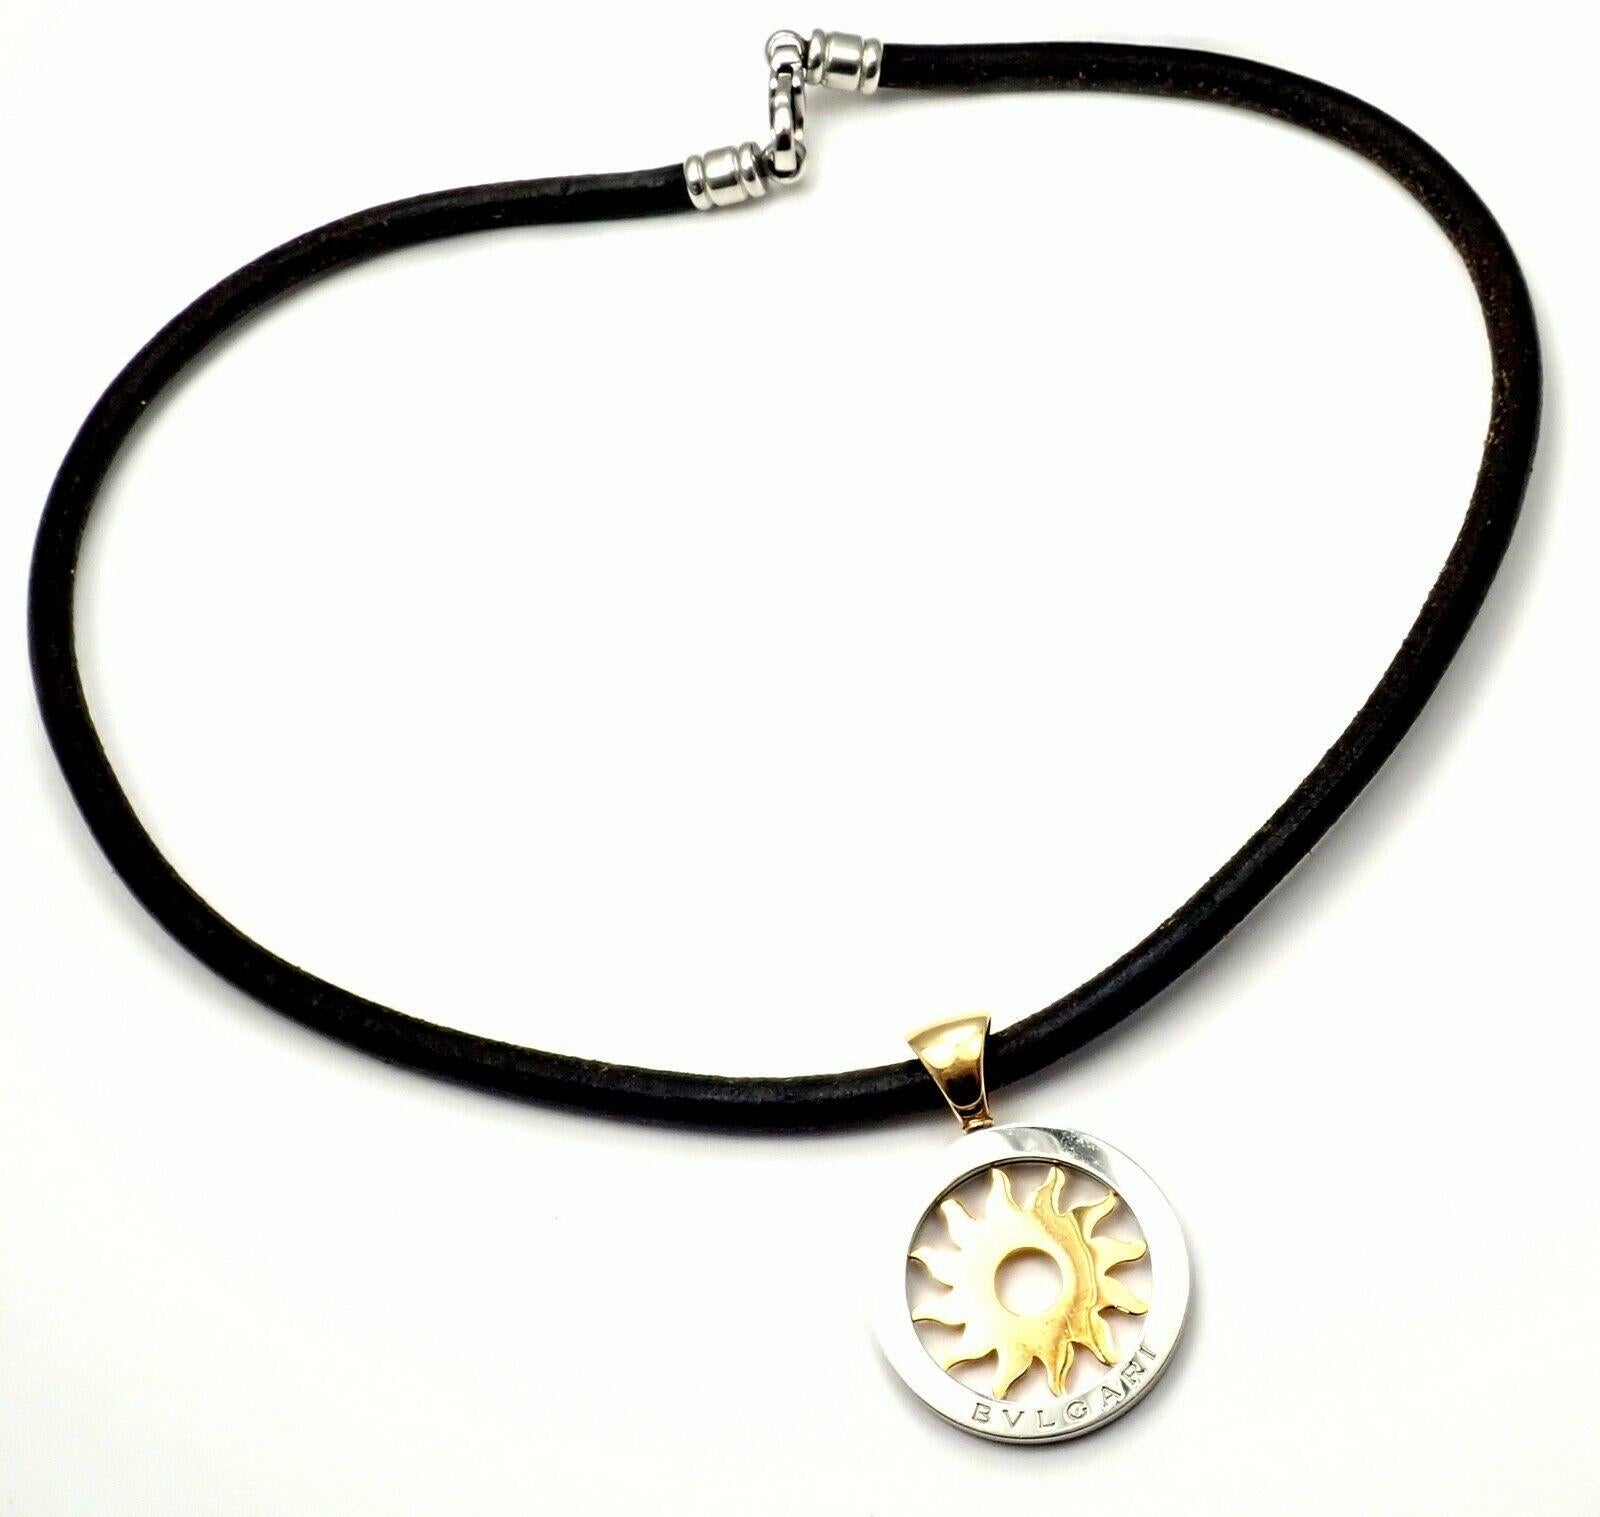 18k yellow gold and stainless steel Tondo Sun pendant necklace by Bulgari.
Details:
Leather Length: 19